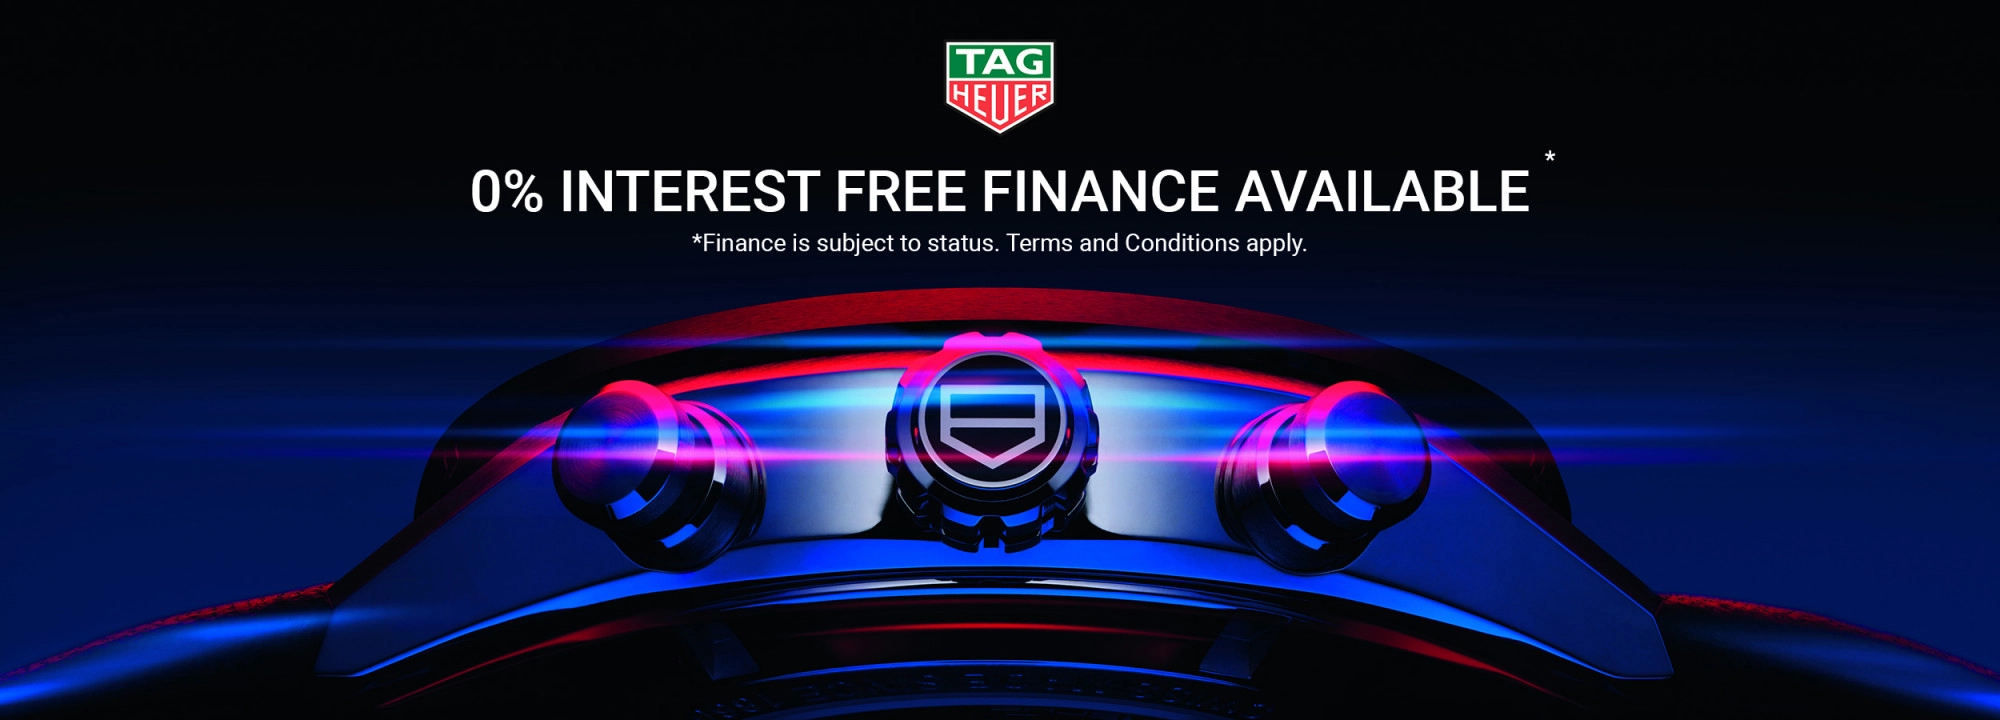 0% interest free finance available, terms and conditions apply